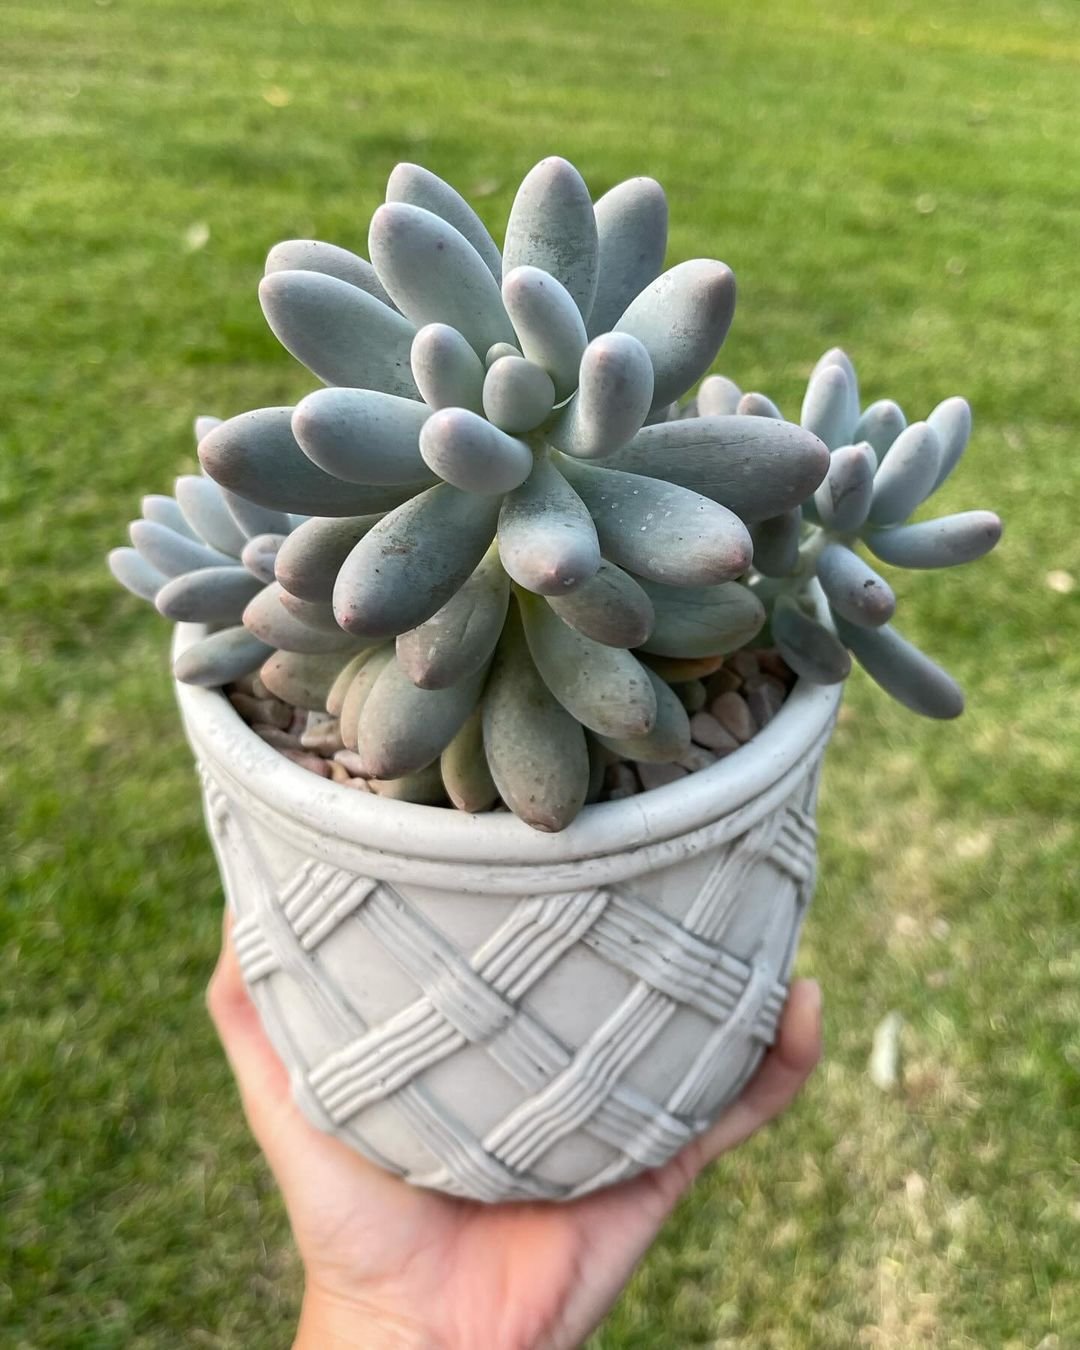  15 Popular Types of Succulents for Your Garden